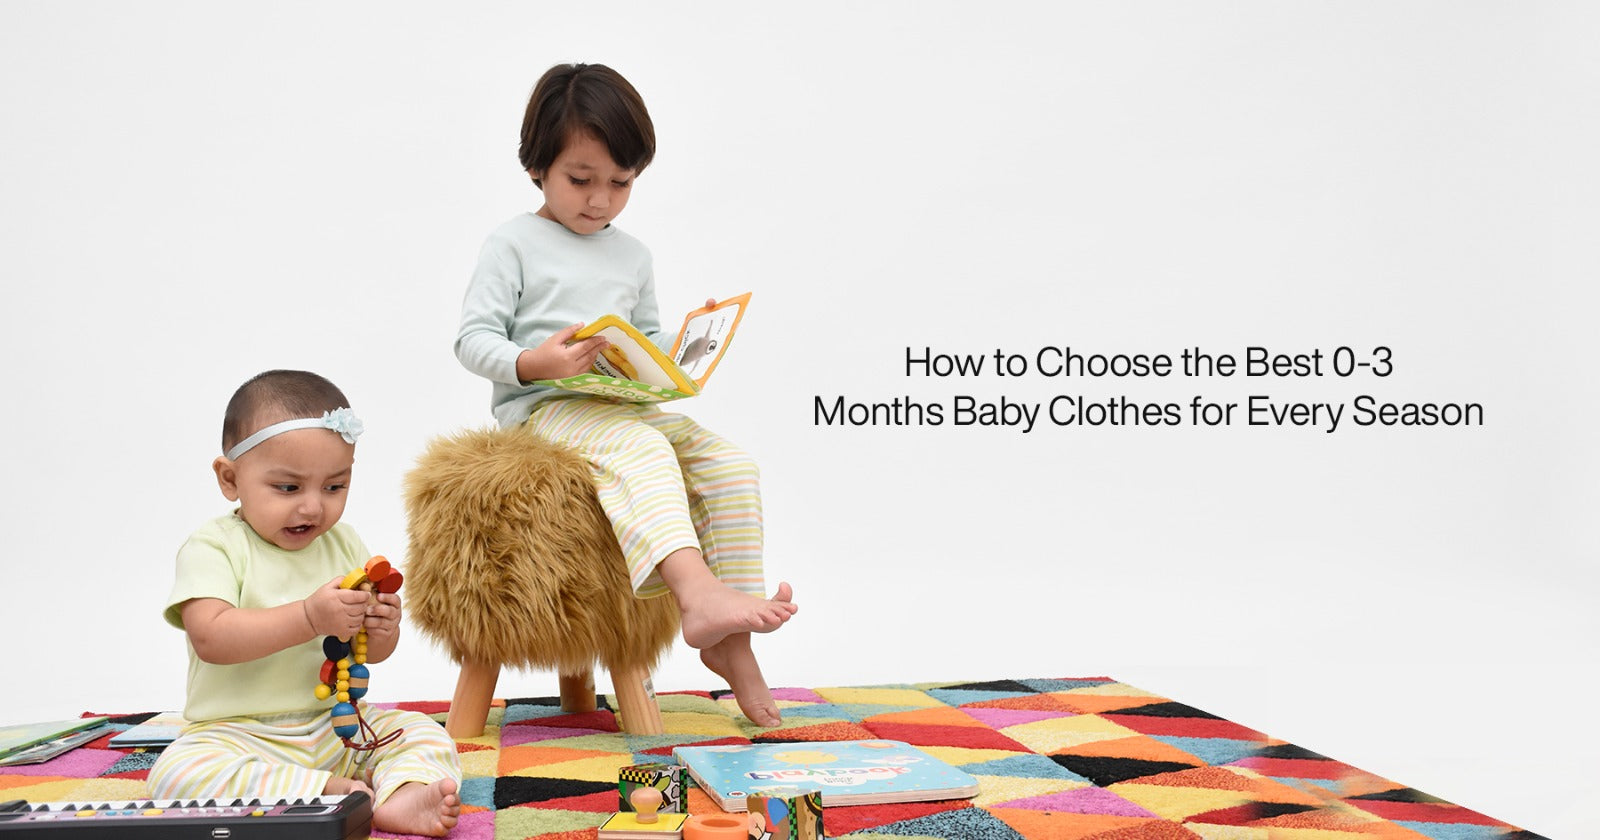 How to Choose the Best 0-3 Months Baby Clothes for Every Season